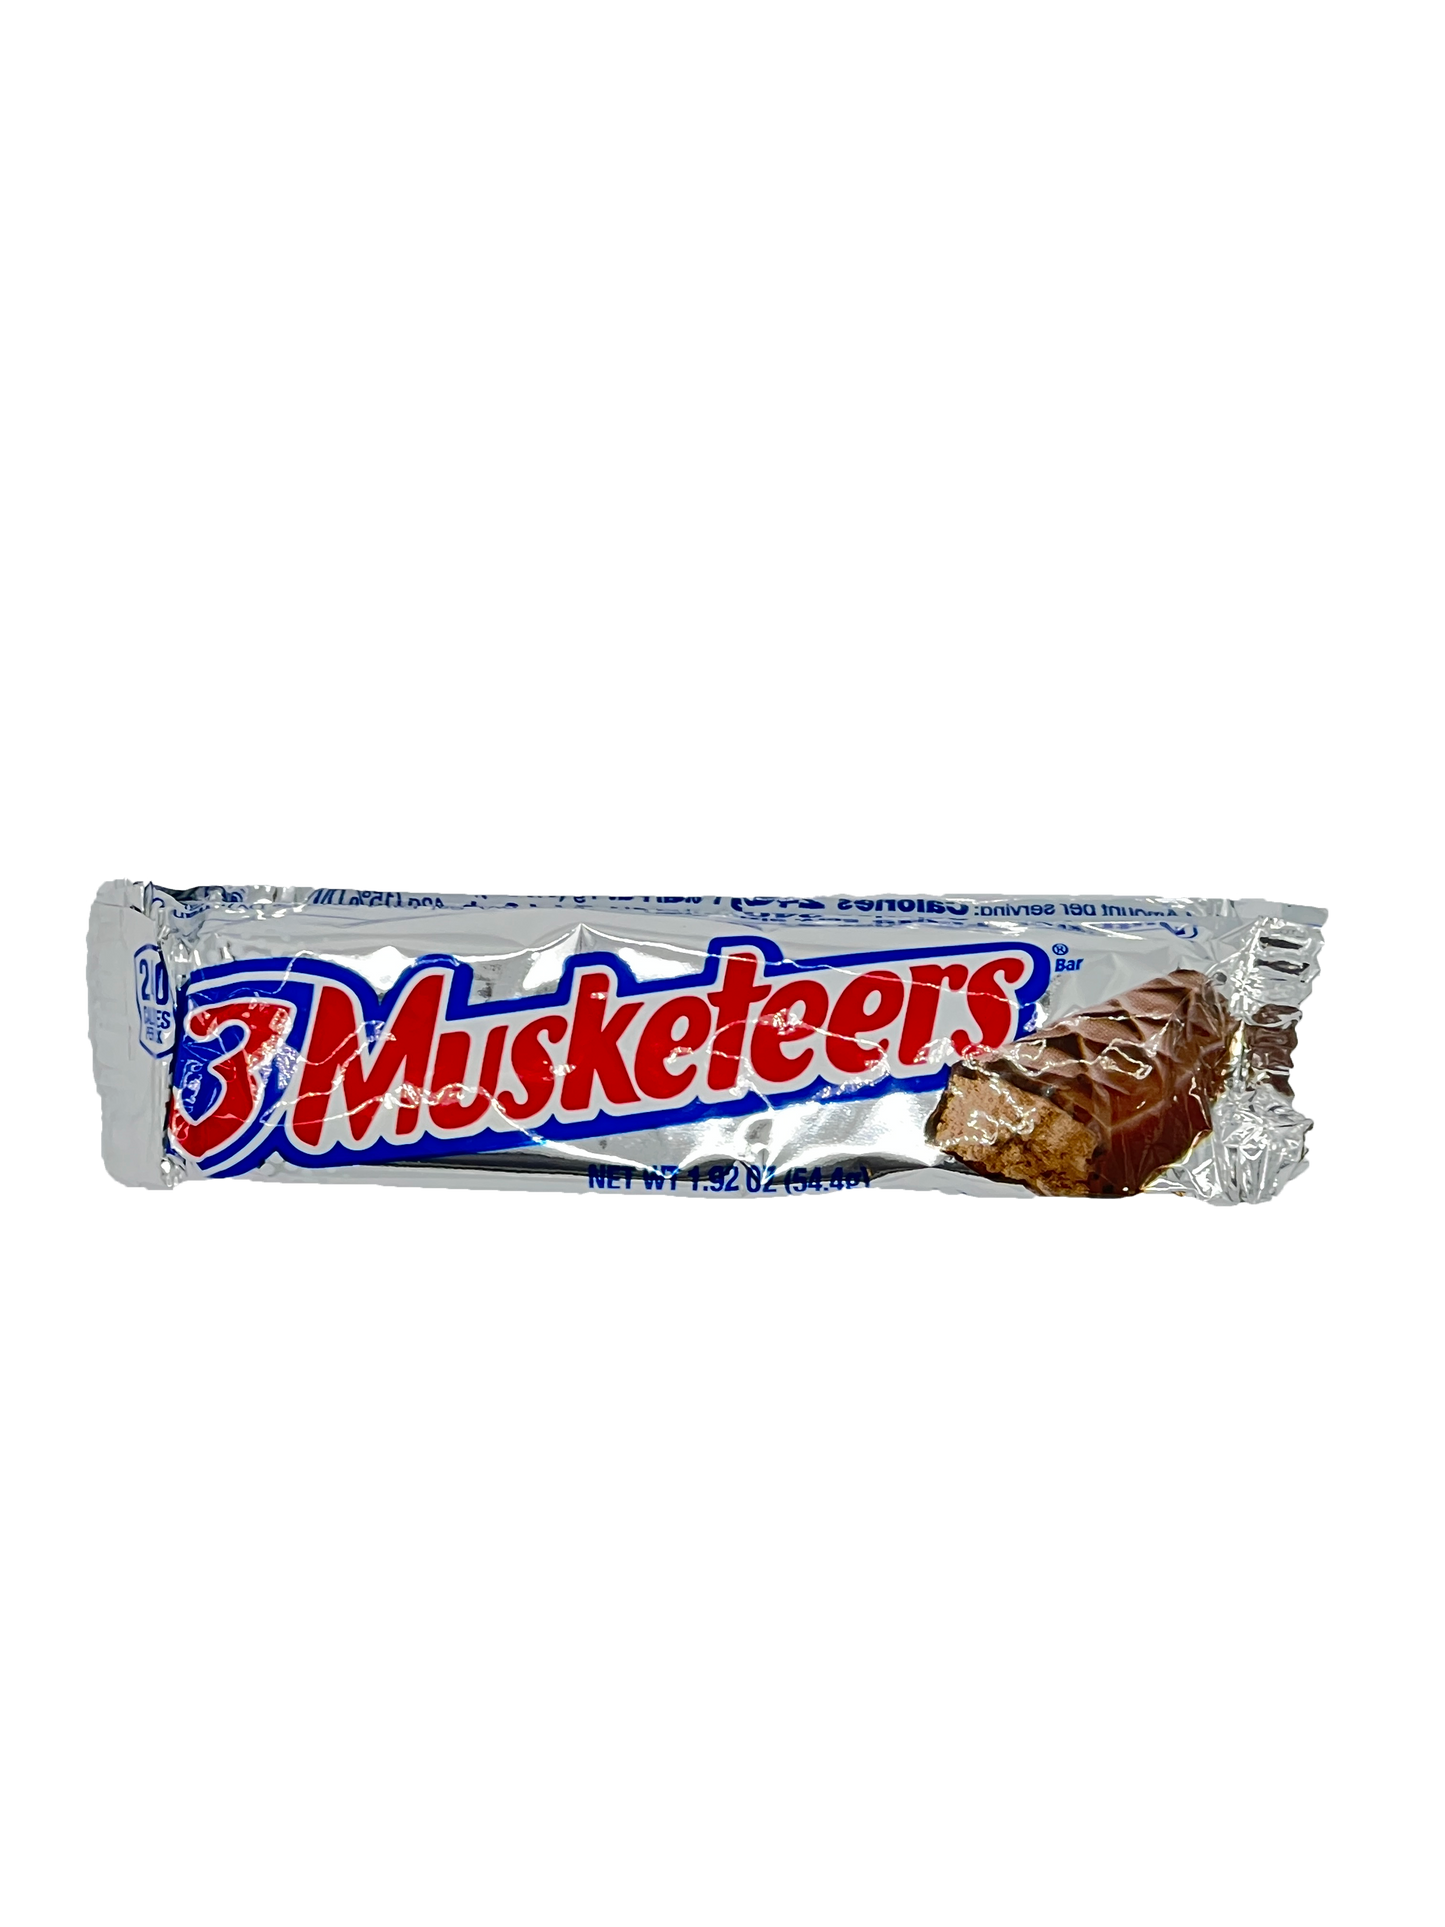 3 Musketeers Full Size Bar 1.92 oz